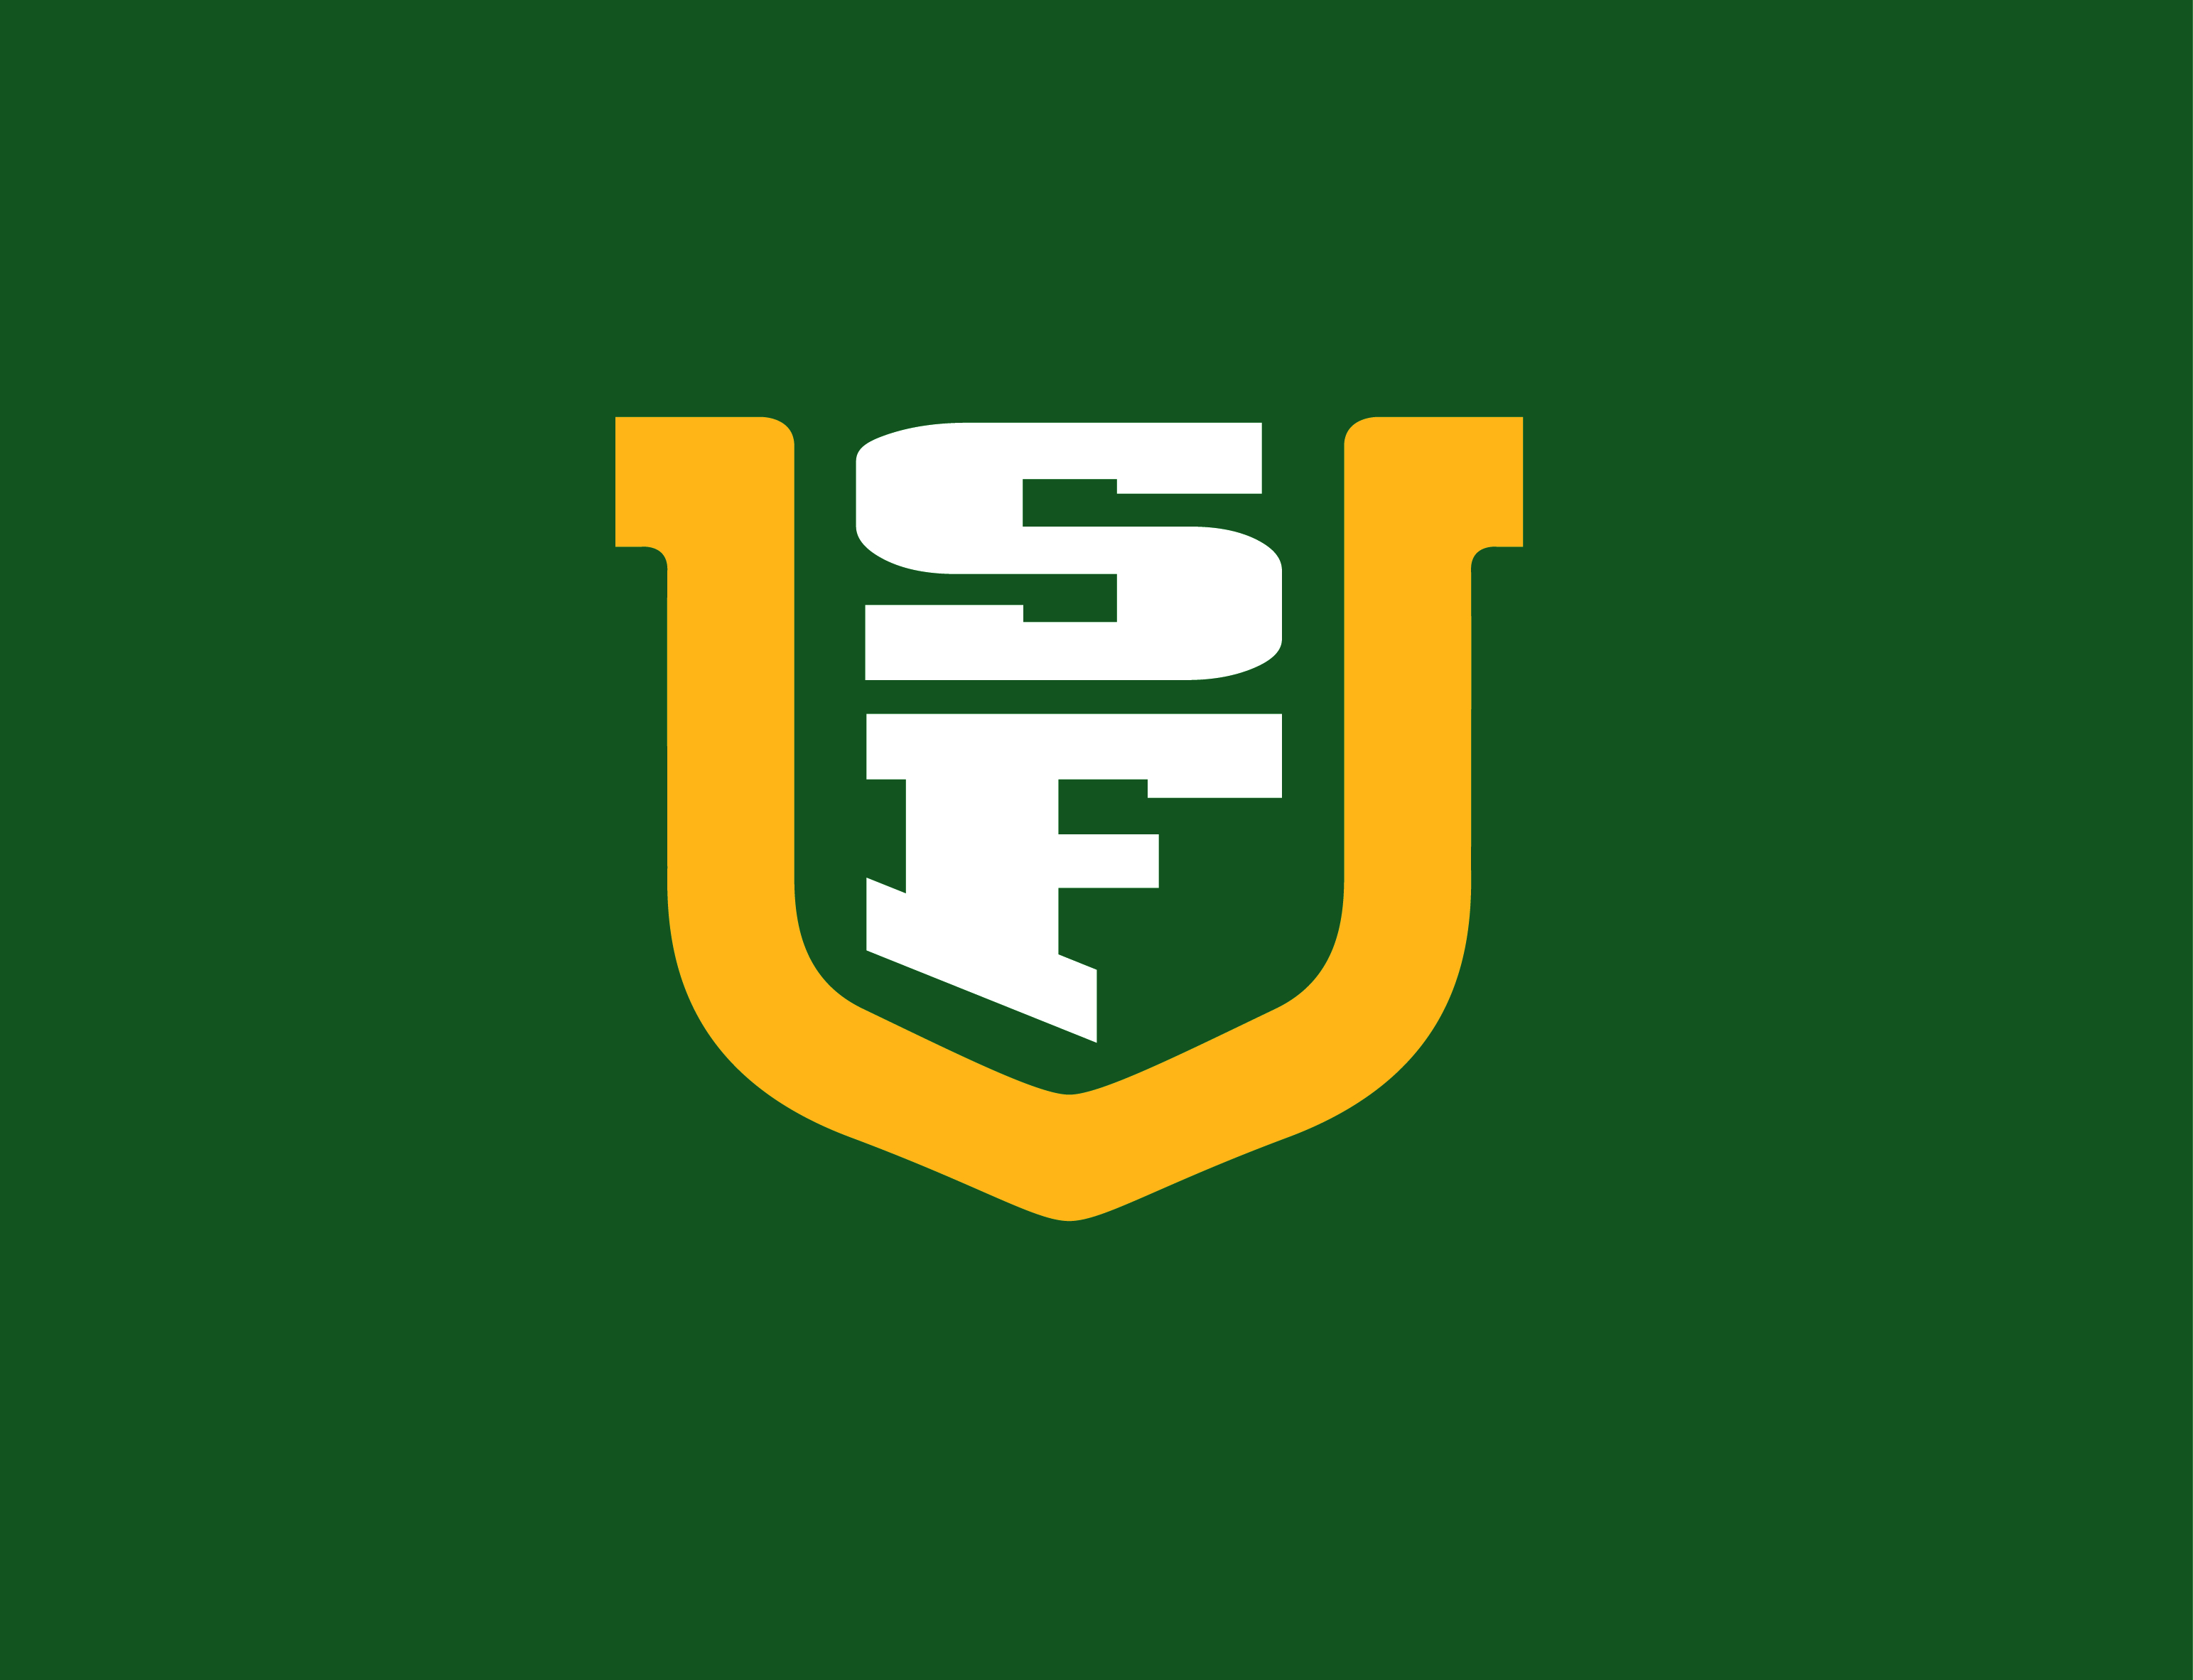 The University of San Francisco (USF) Athletics Department, in partnership with the USF Department of Recreational Sports, will host Friday Night Fights at the Hilltop on Friday, Sept. 30, 2016.